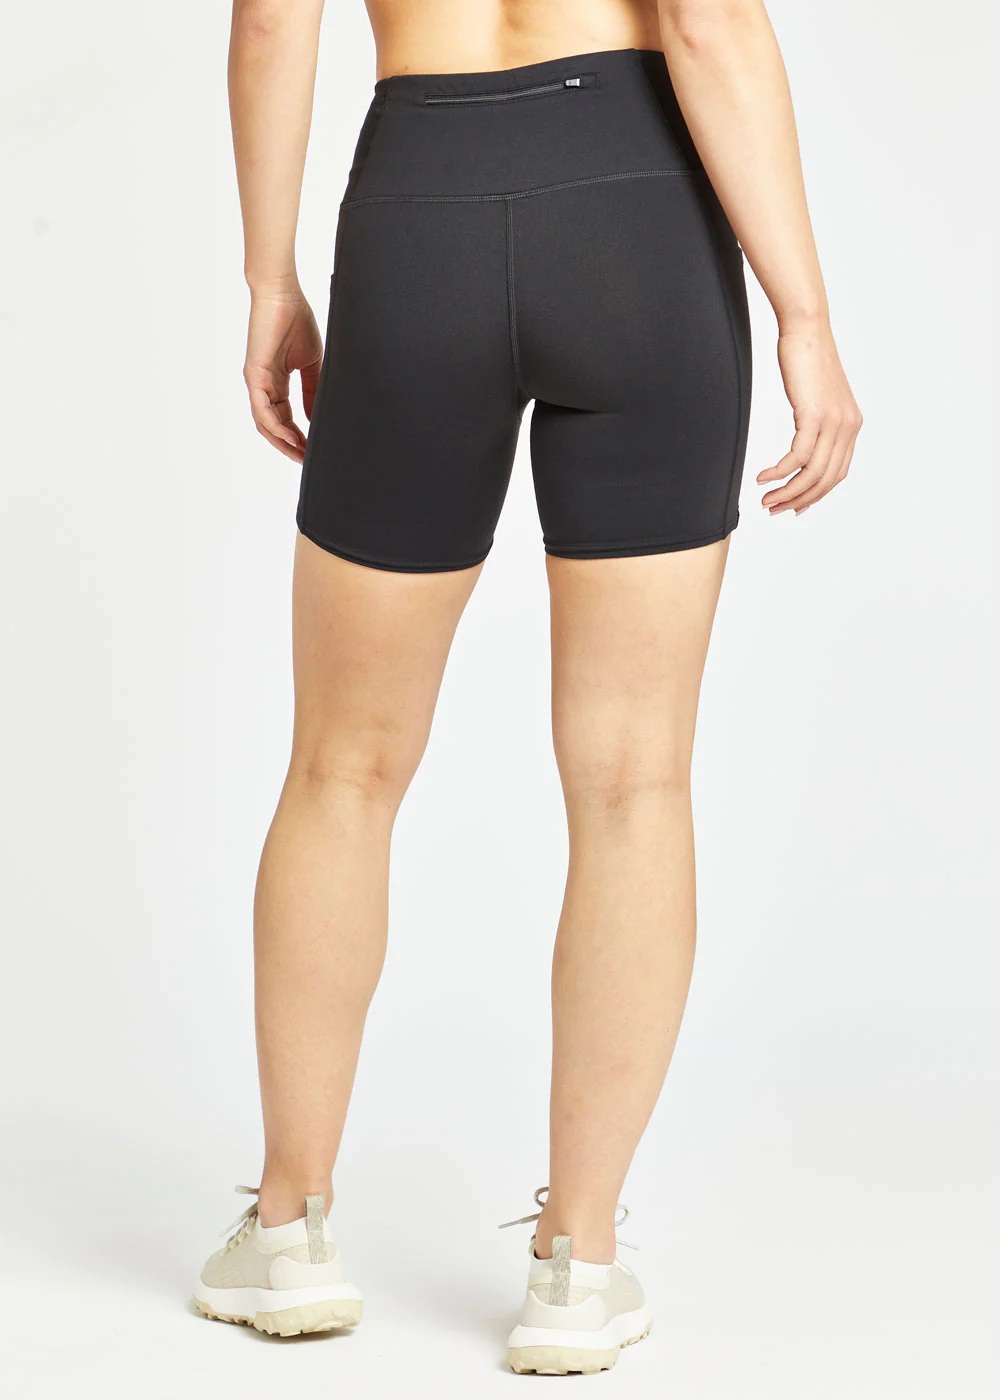 Oiselle Women's Workout Clothing: Sale, Clearance & Outlet